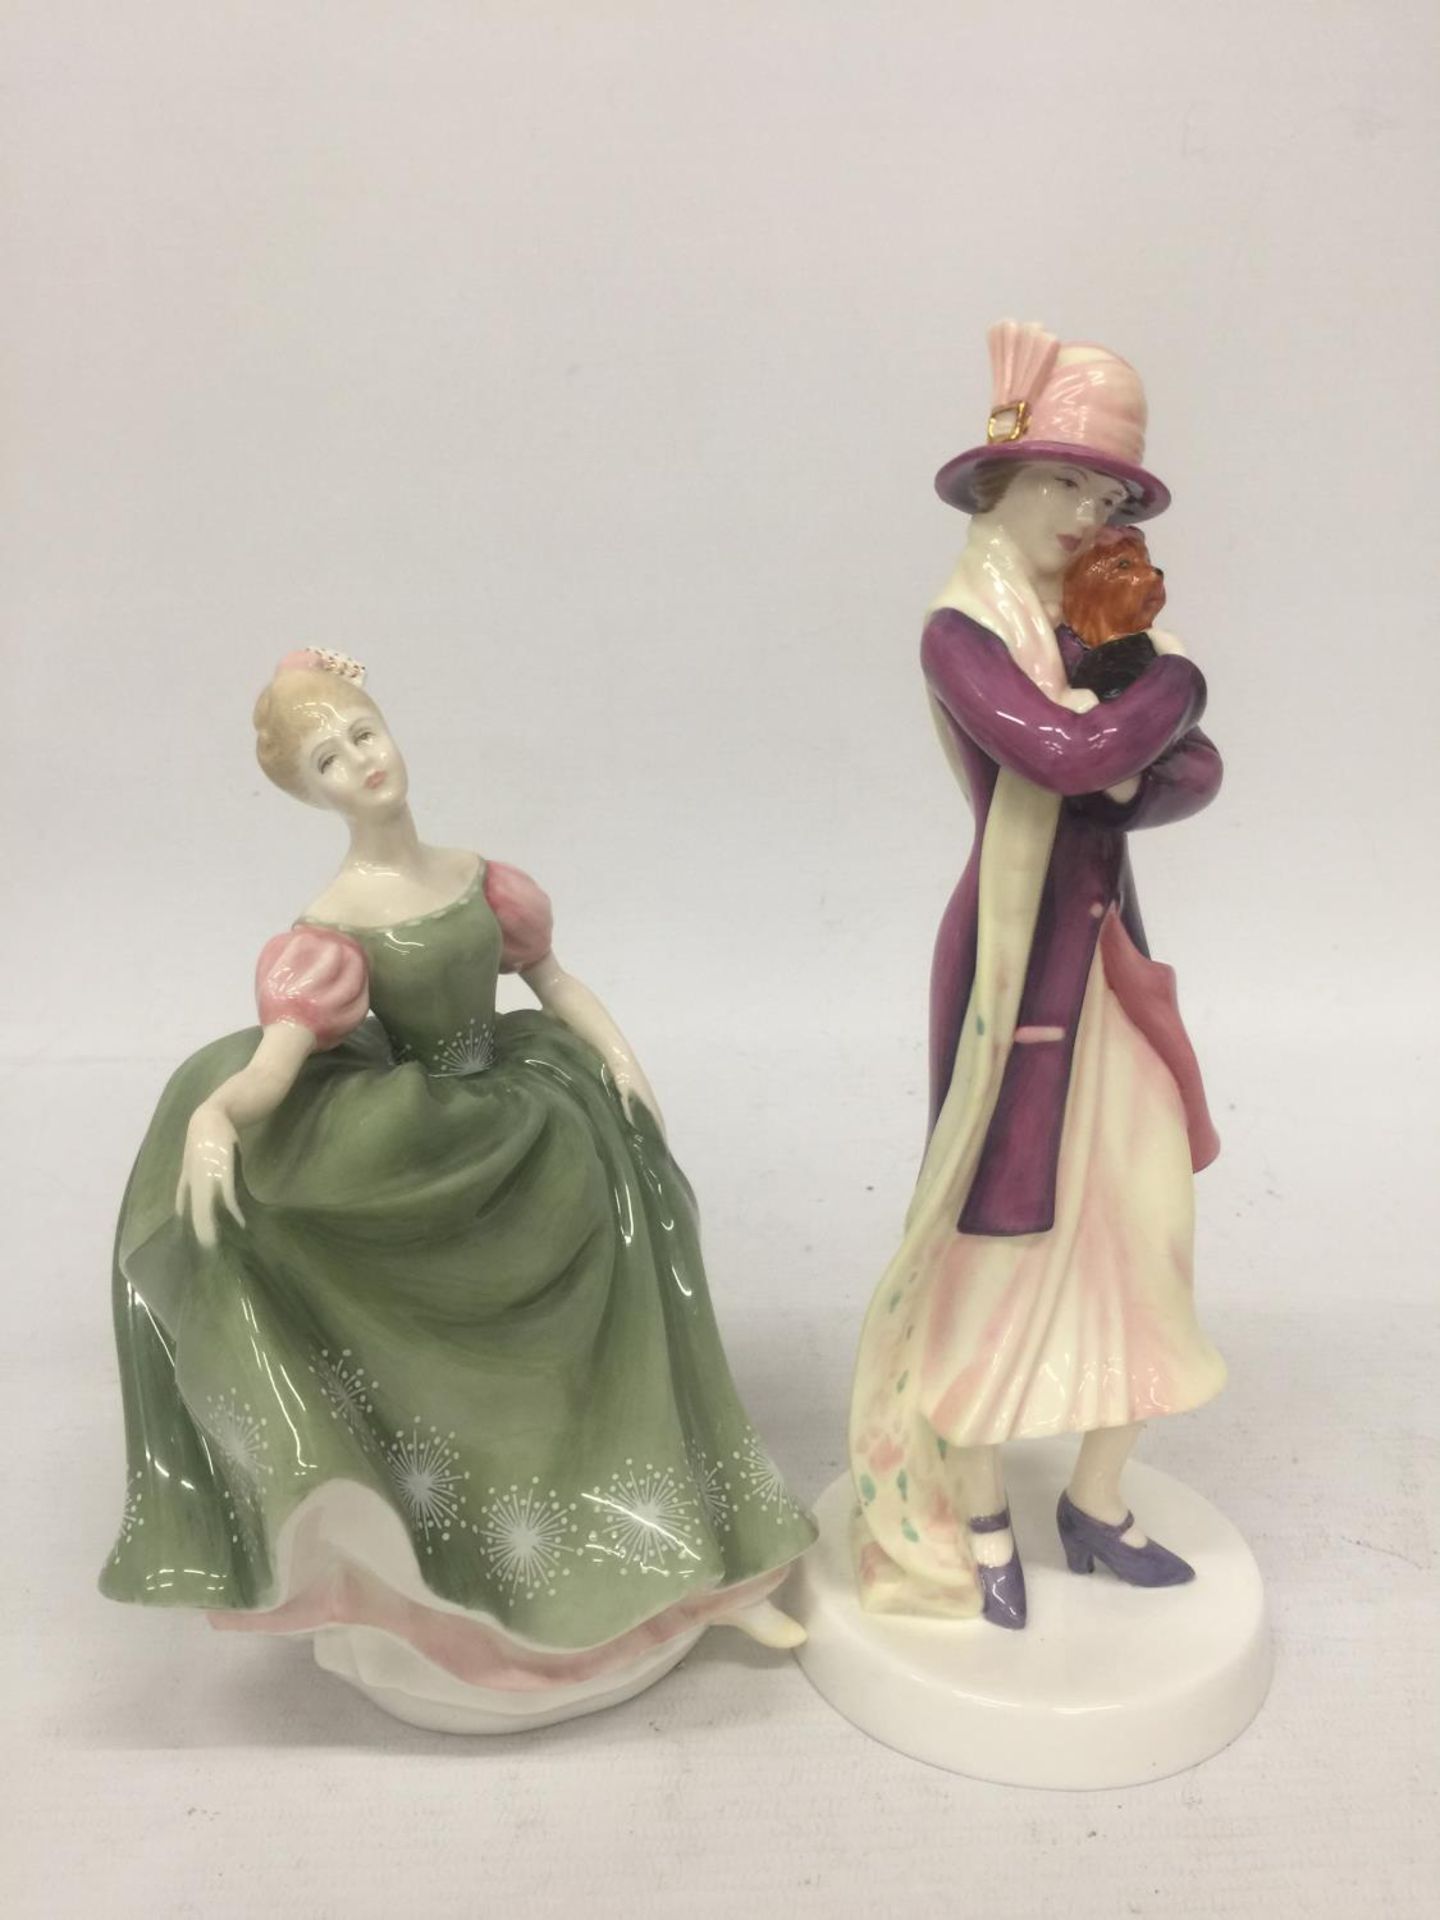 TWO ROYAL DOULTON FIGURINES "PHILLIPA" FROM THE PRETTY LADIES COLLECTION (22.5 CM) AND MICHELLE HN - Image 2 of 5